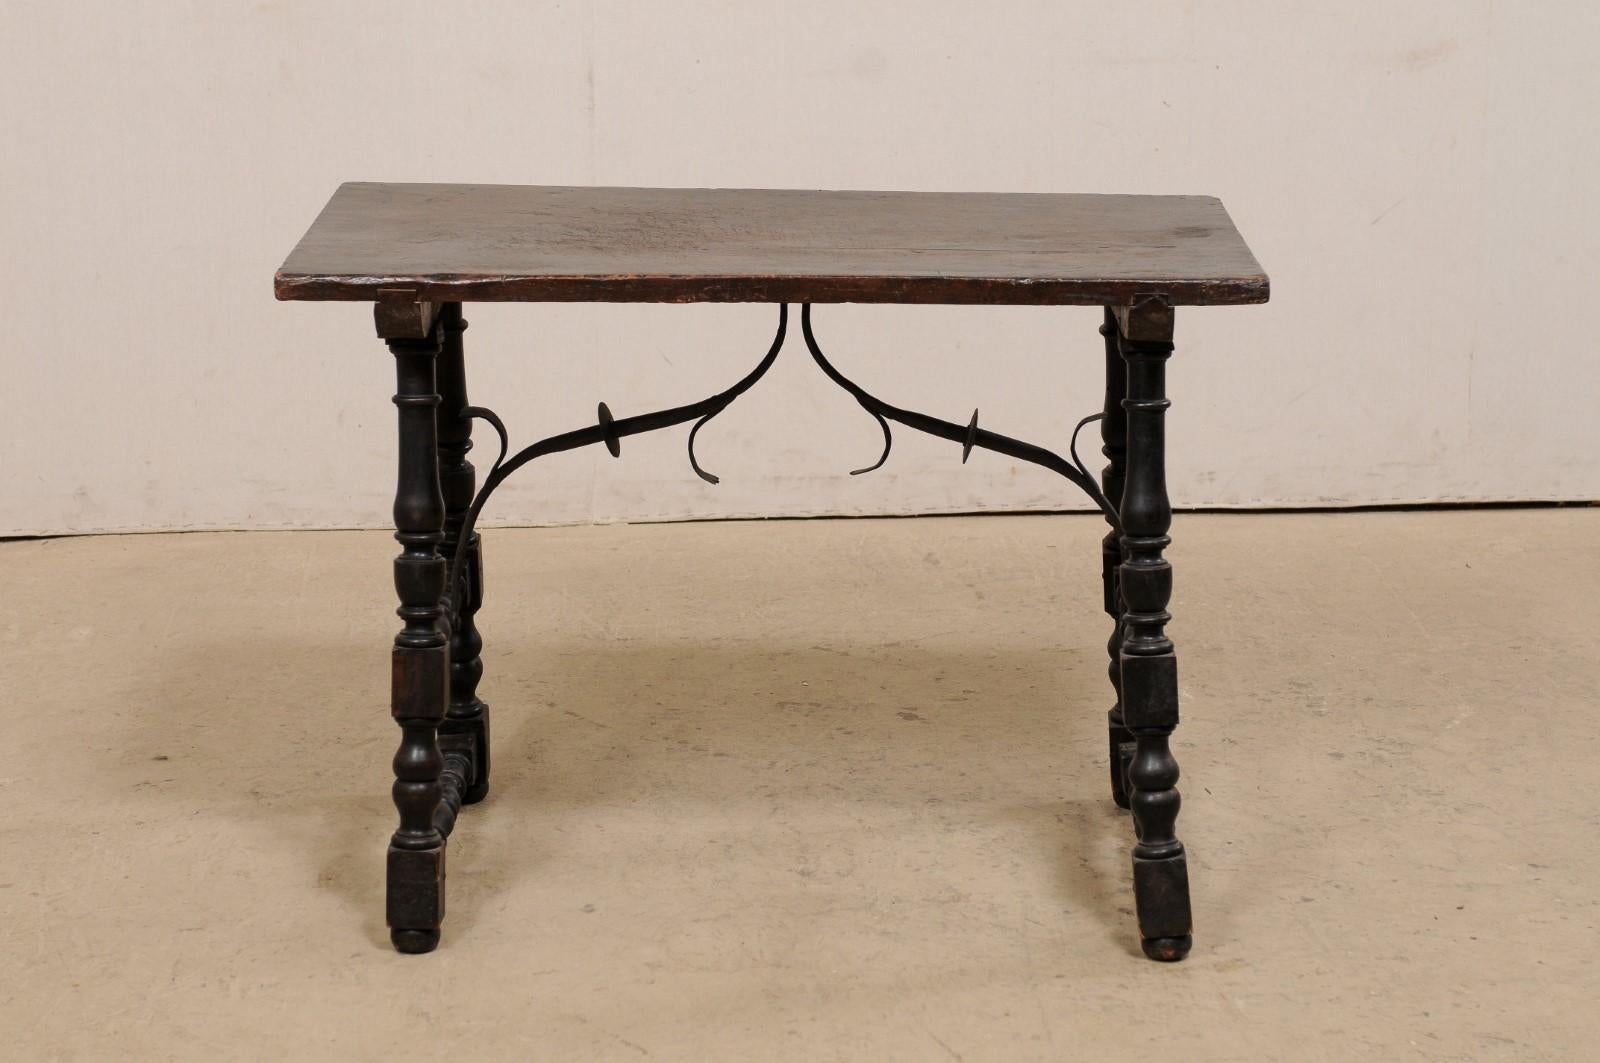 18th c. Italian Wood Table w/ Turned Trestle Legs & Forged Iron Stretcher For Sale 2